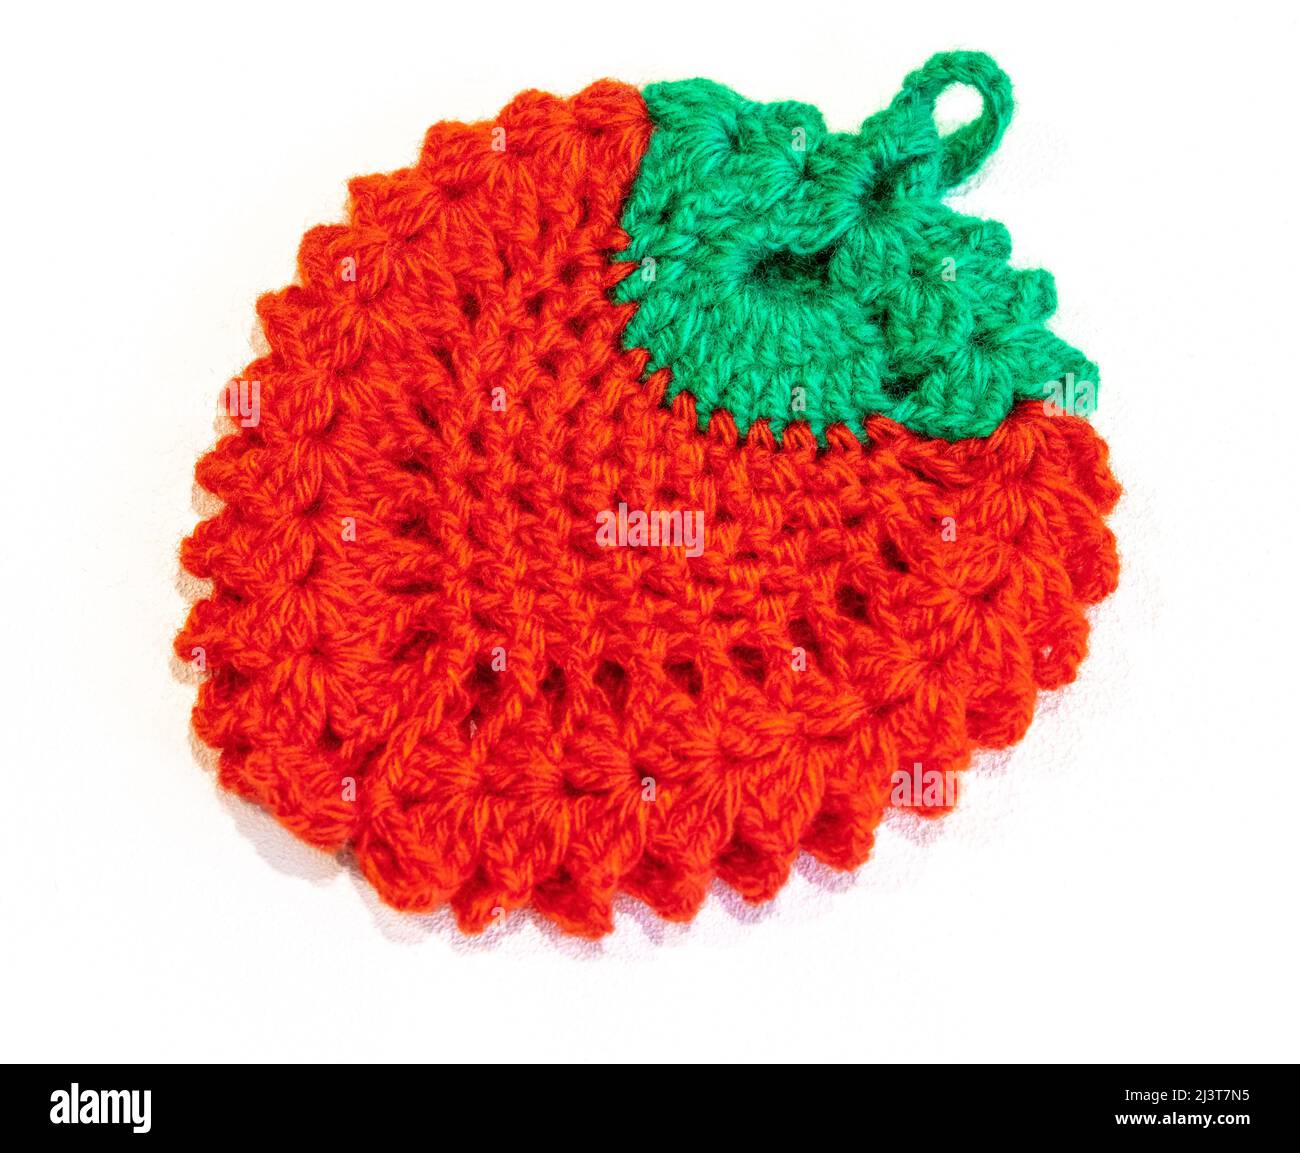 Knitted red-green rug in the form of a berry on a white background close-up. Stock Photo